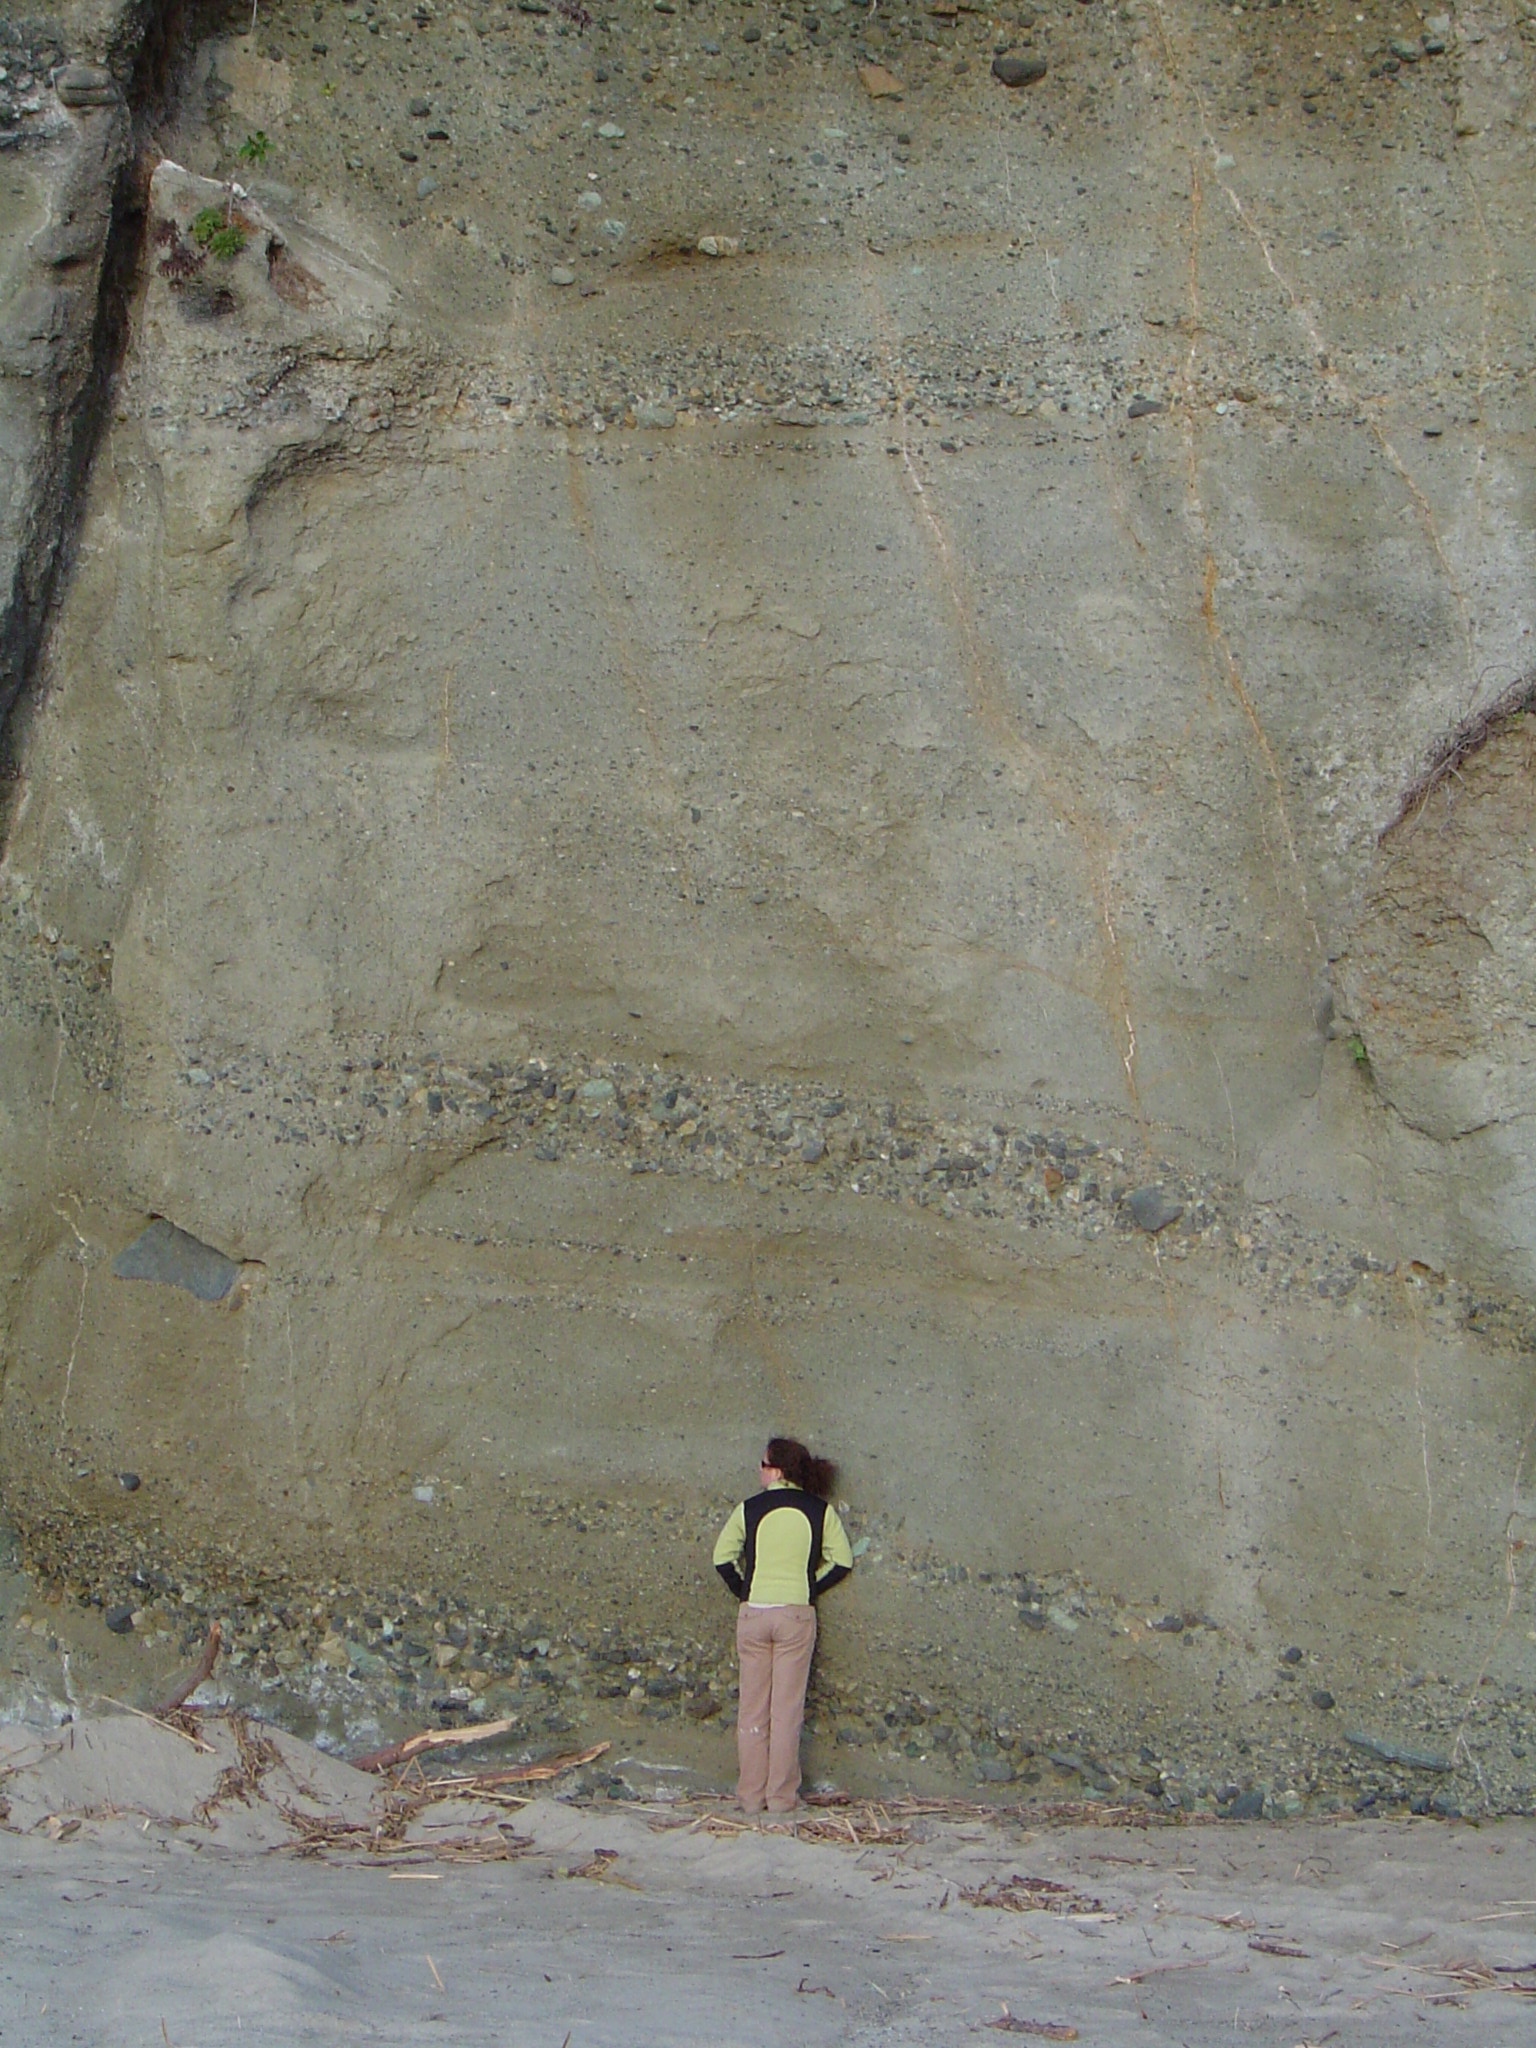 Scaling difference: Laura and the outcrop